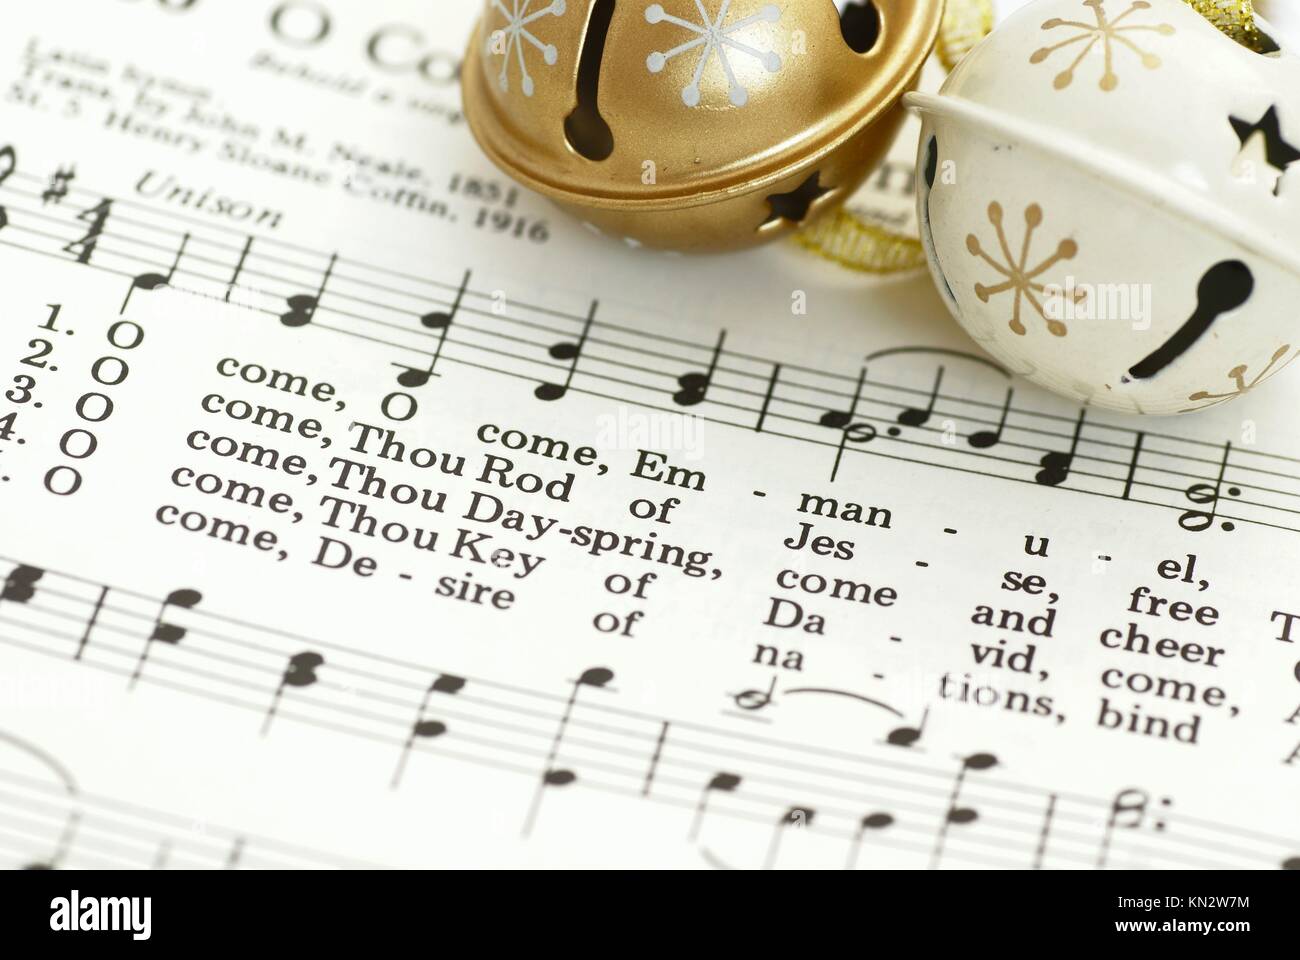 Detail of songbook with Christmas carols and christmas decoration Stock Image